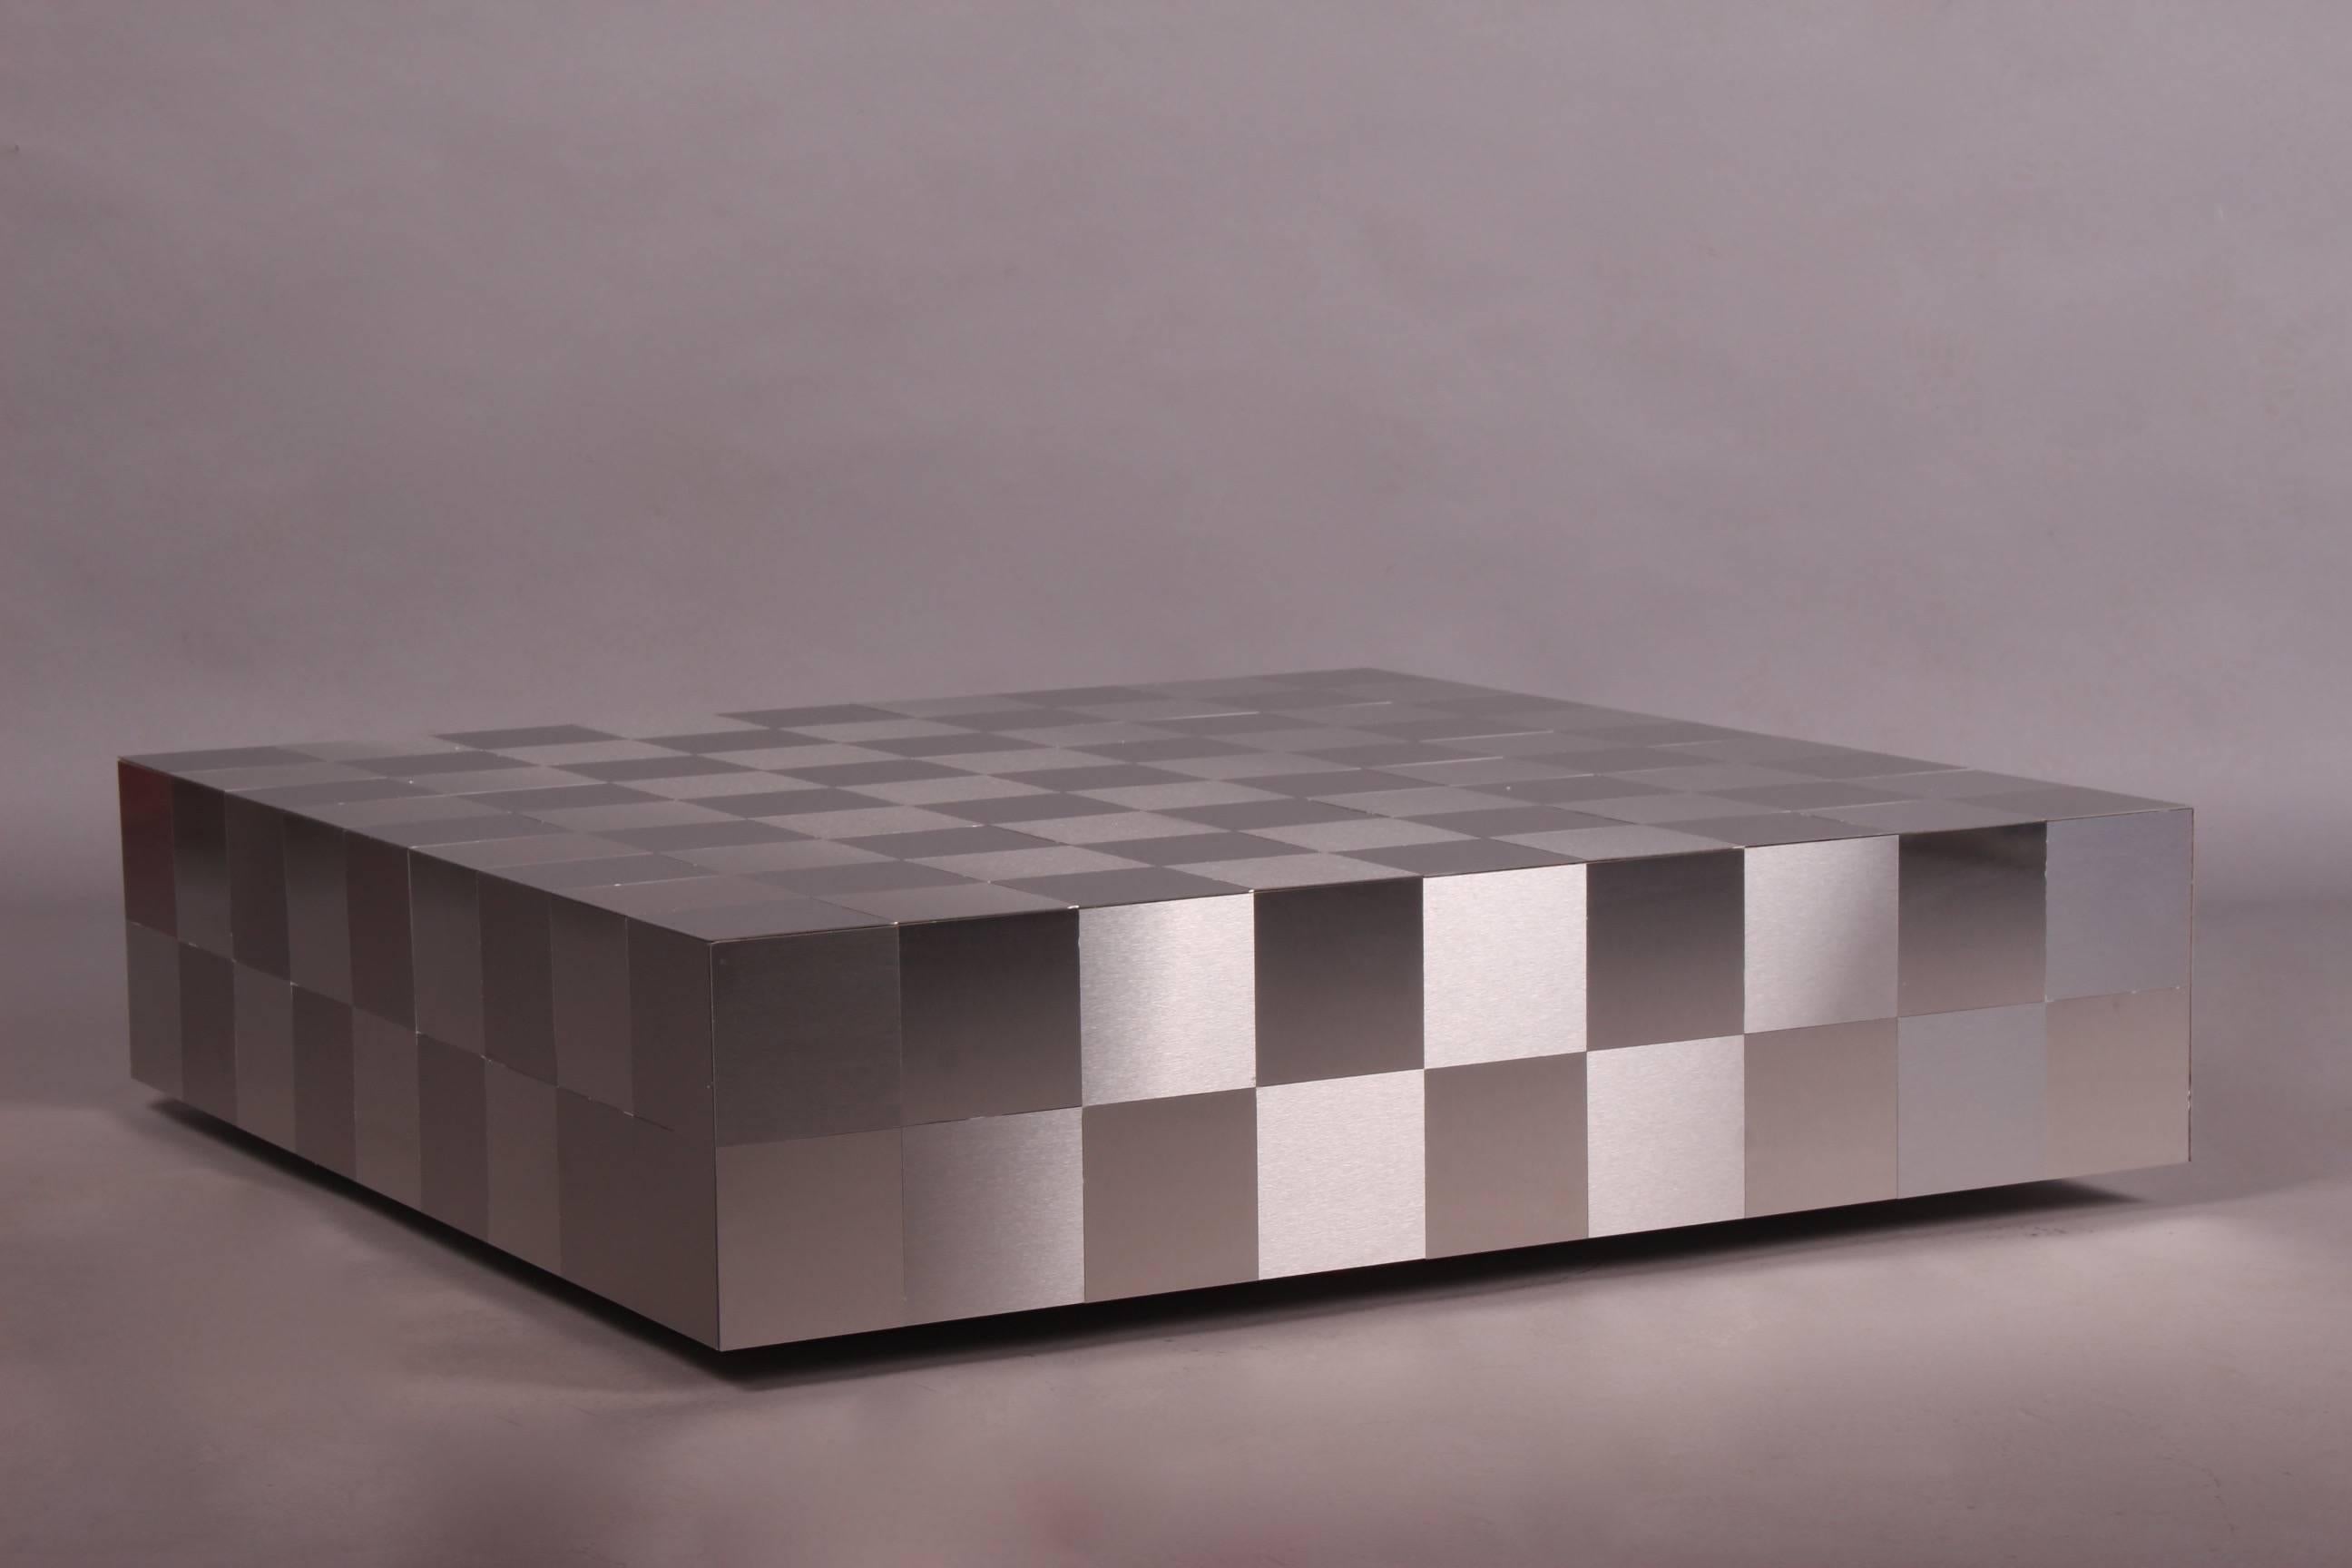 Stainless steel coffee table edited and produced by Tic Tac production modele damier.